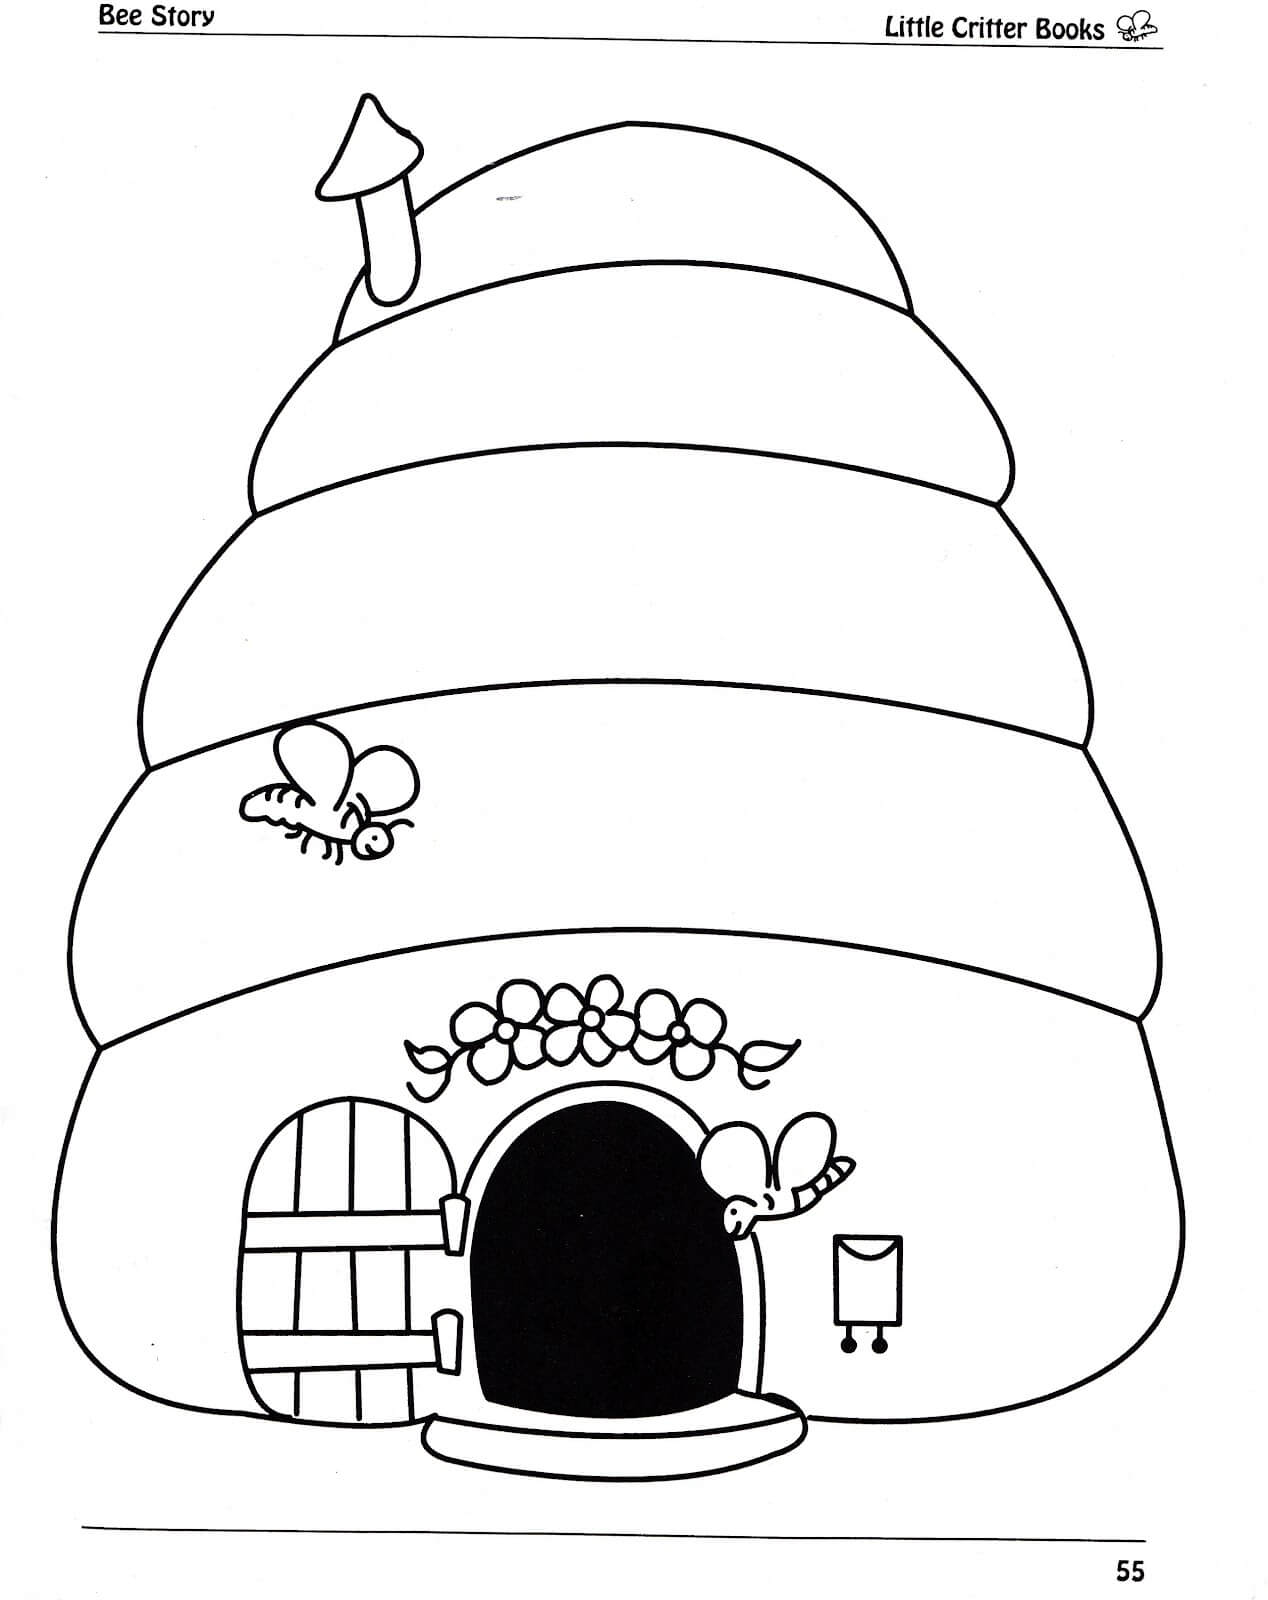 Bee Hive Coloring Page for Kids